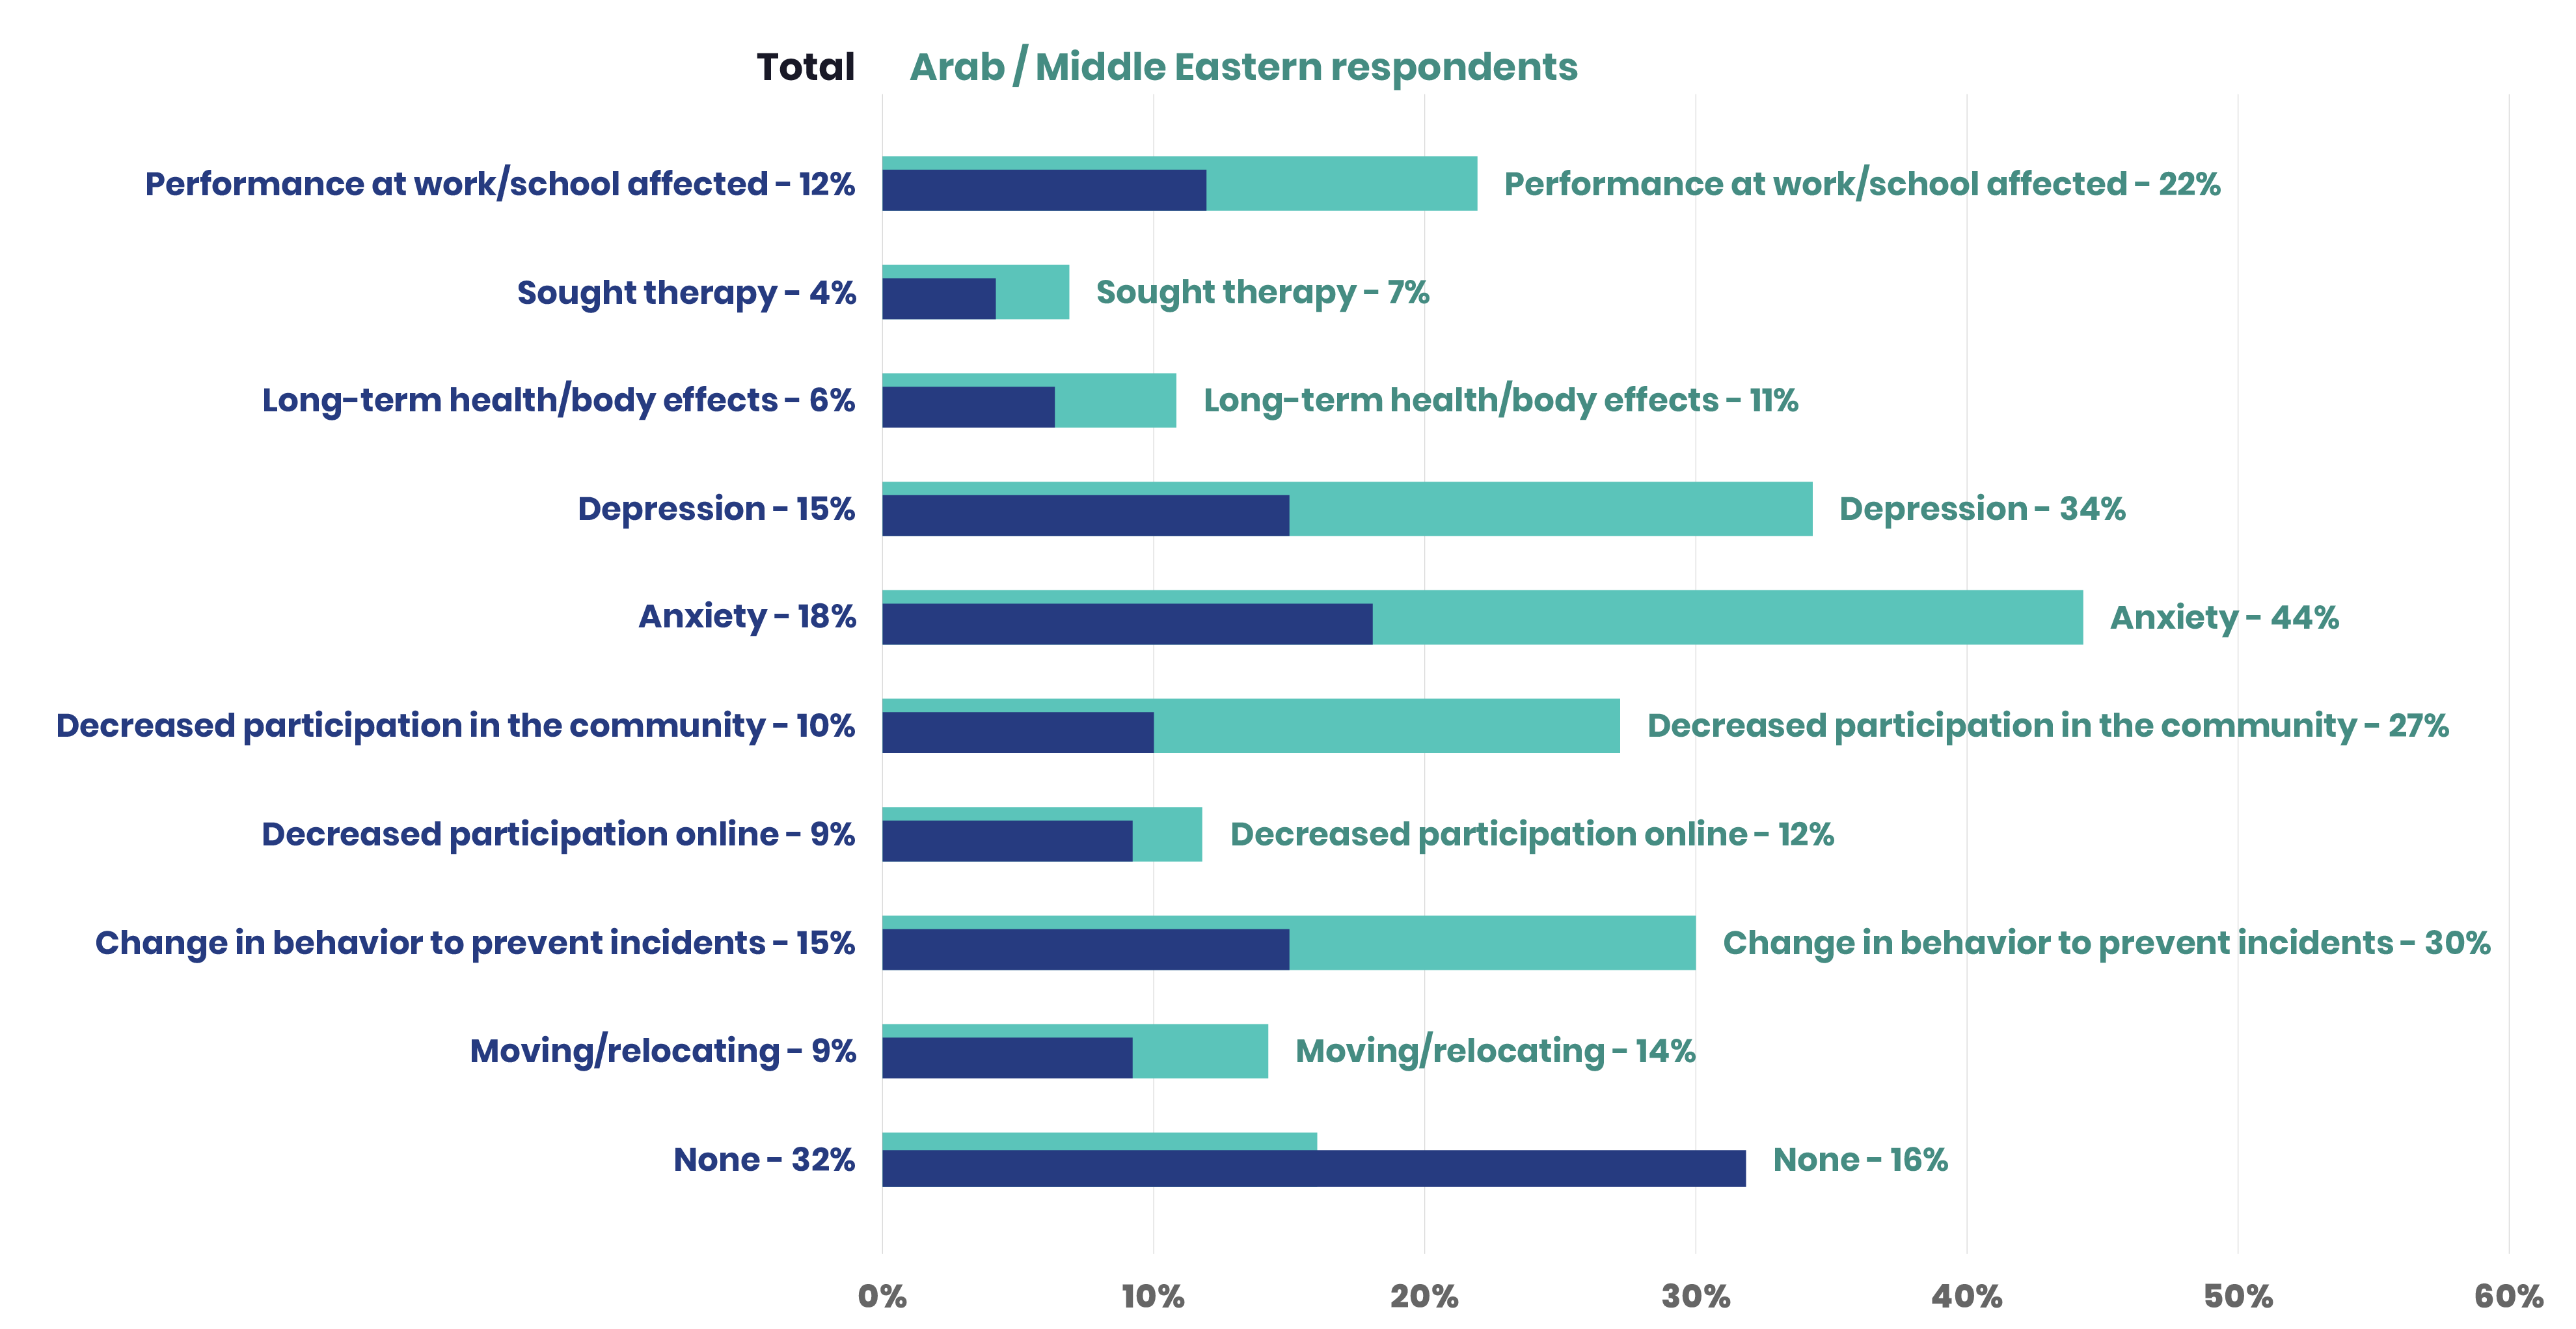 Bar chart depicting outcomes from experiences of incidents of hate across all respondents versus Arab/Middle Eastern respondents